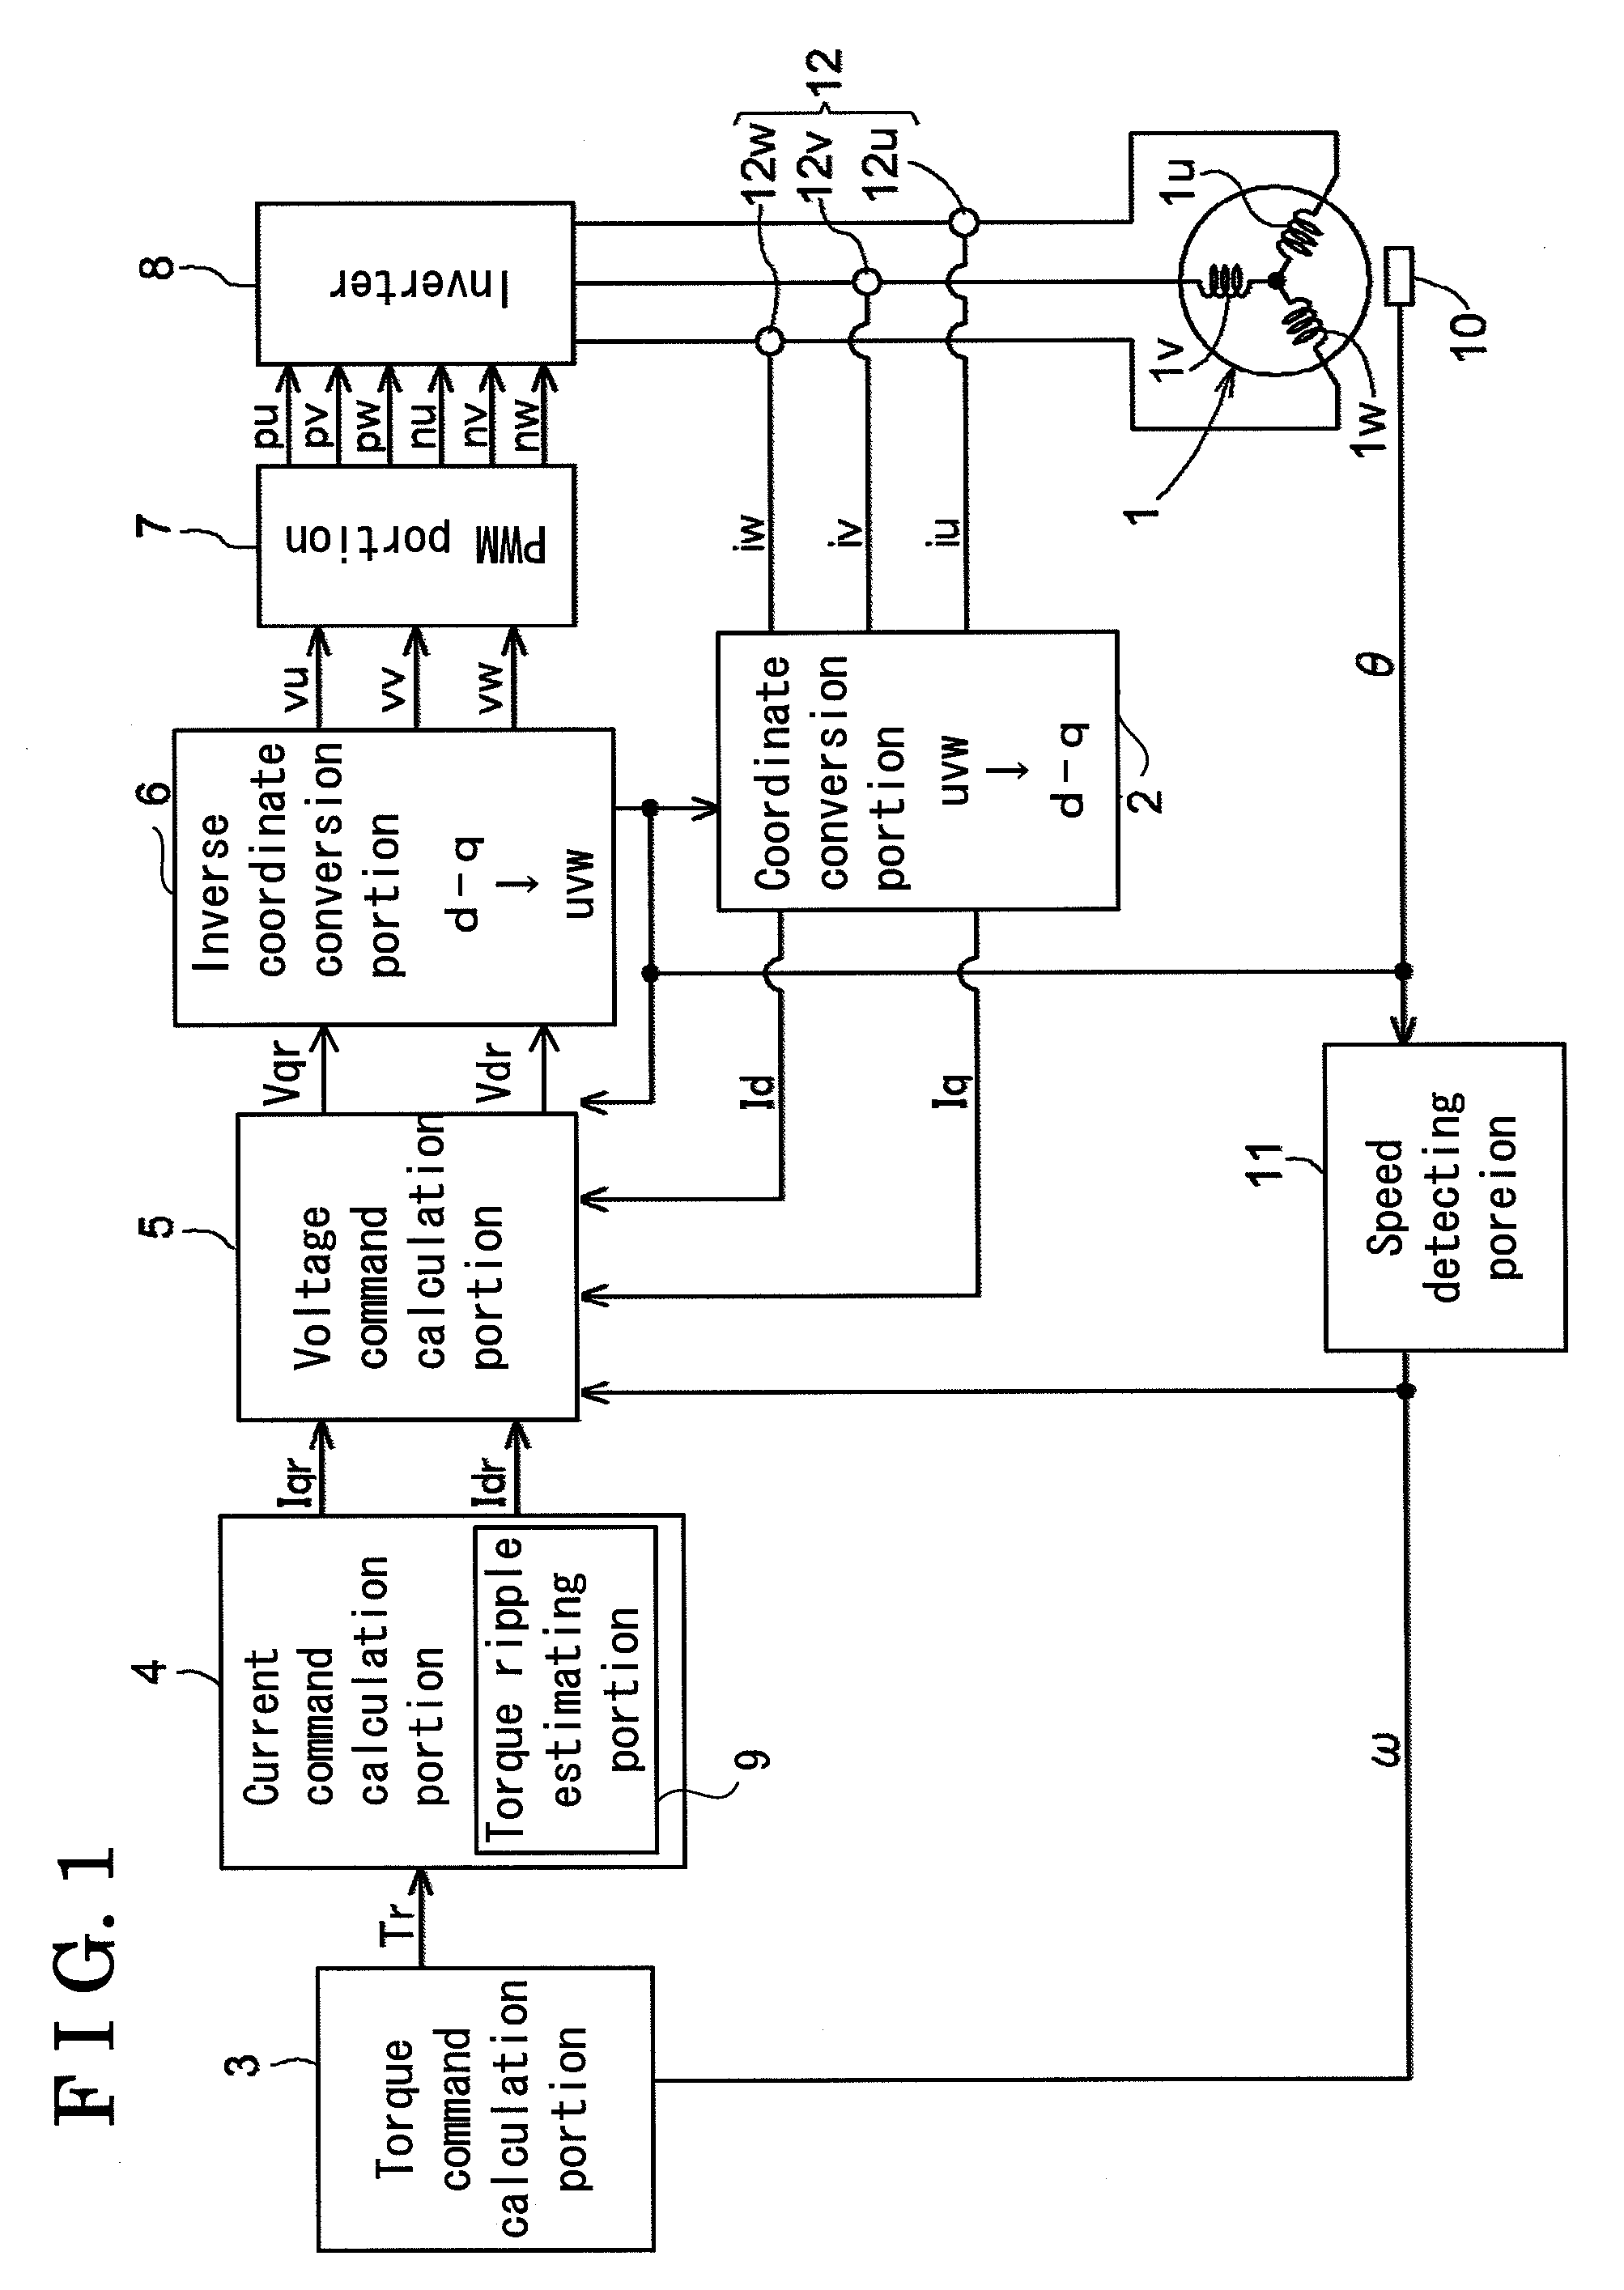 Synchronous motor control device and method for optimizing synchronous motor control